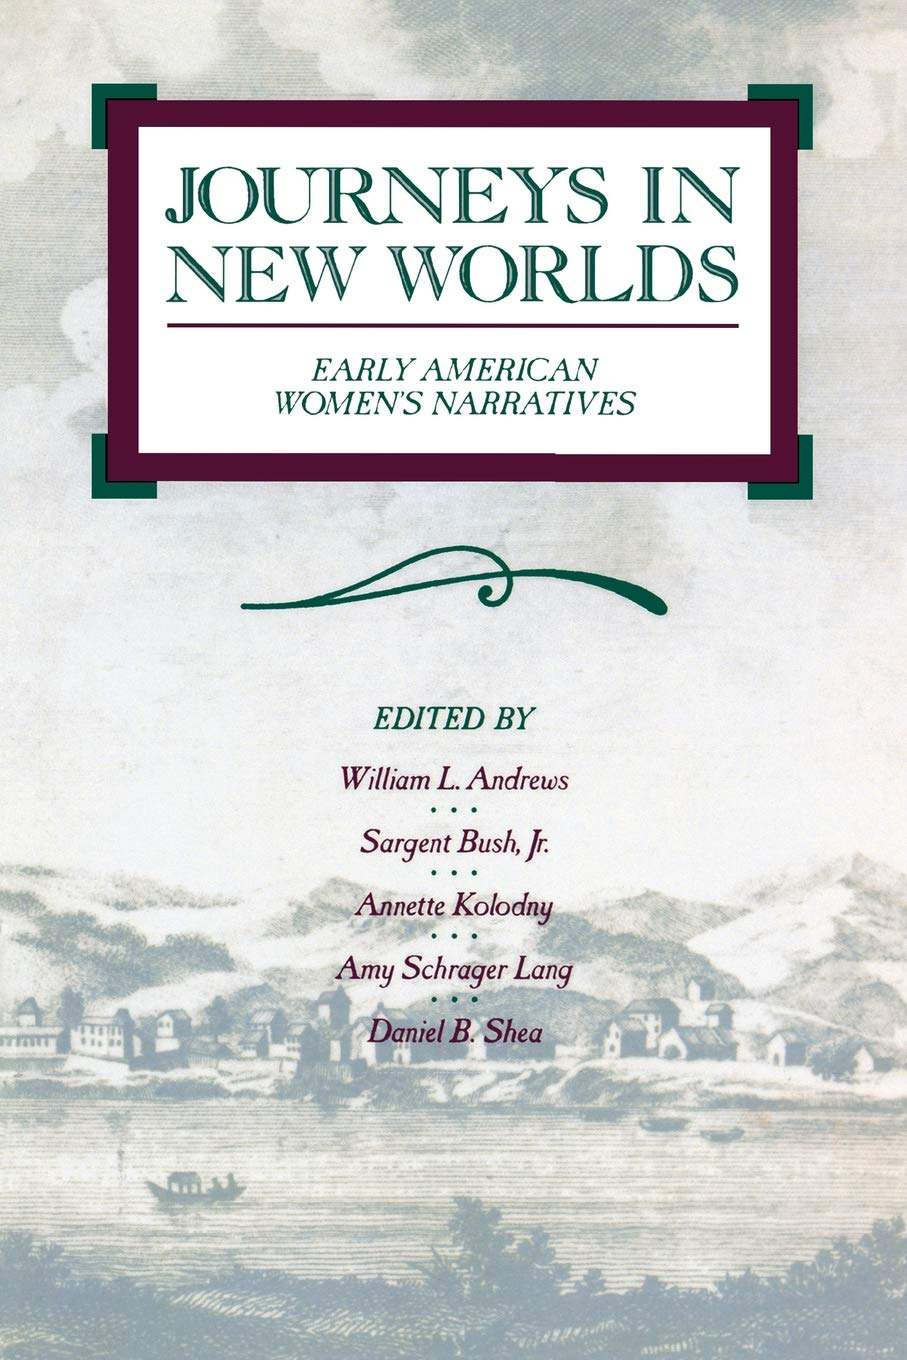 JOURNEYS IN NEW WORLDS - Virginia Book Company